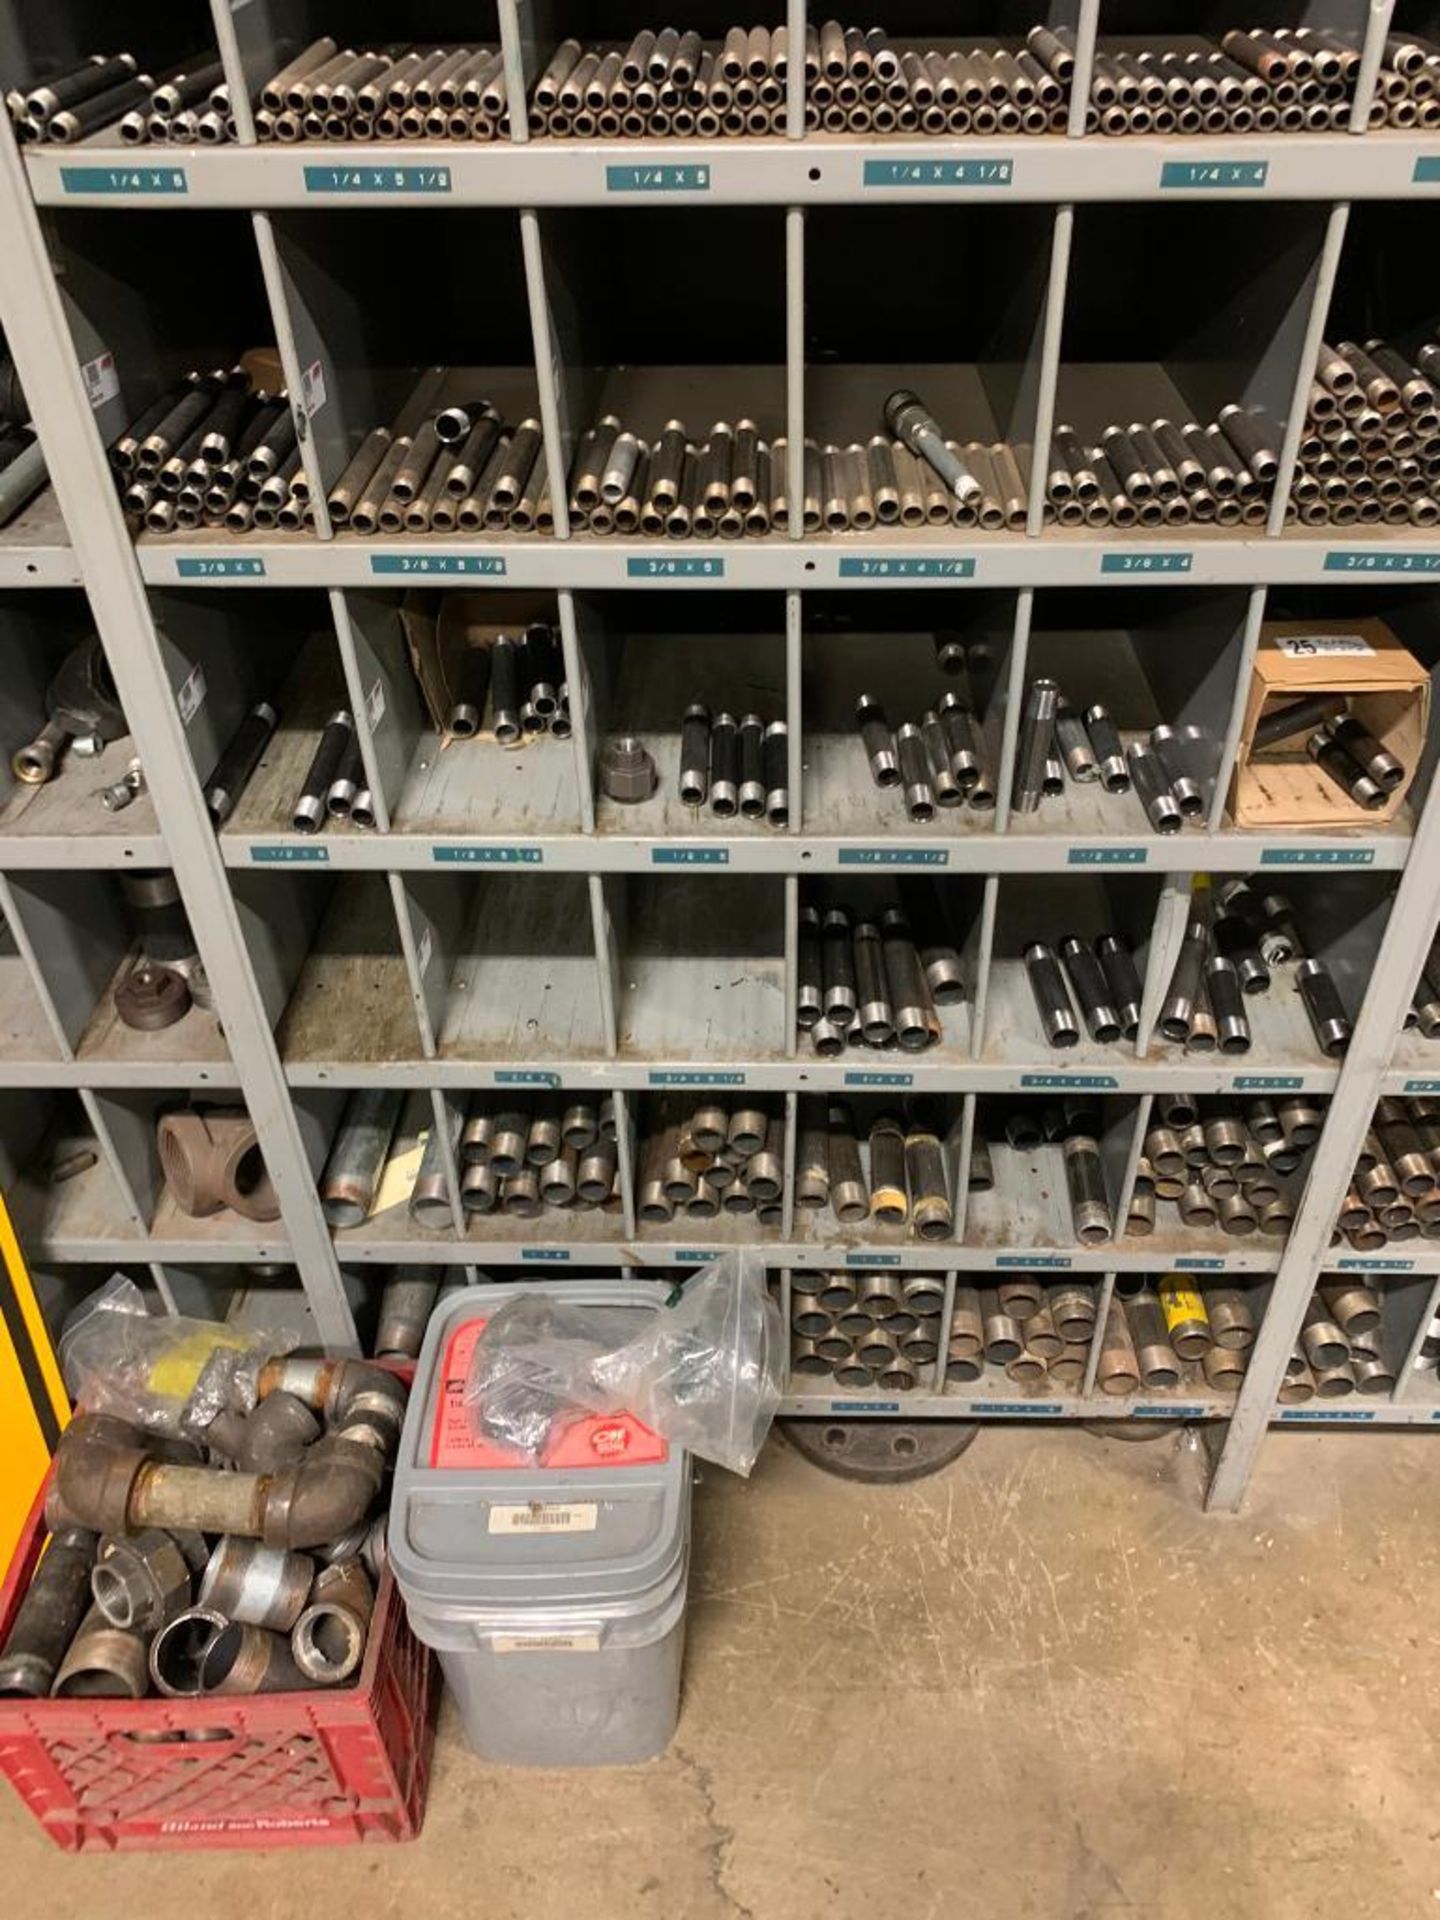 (10x) Bays of Assorted Shelving w/ Pipe Fittings, Pipe Nipples, Elbows, Connectors, Tees, Hardware - Image 11 of 21